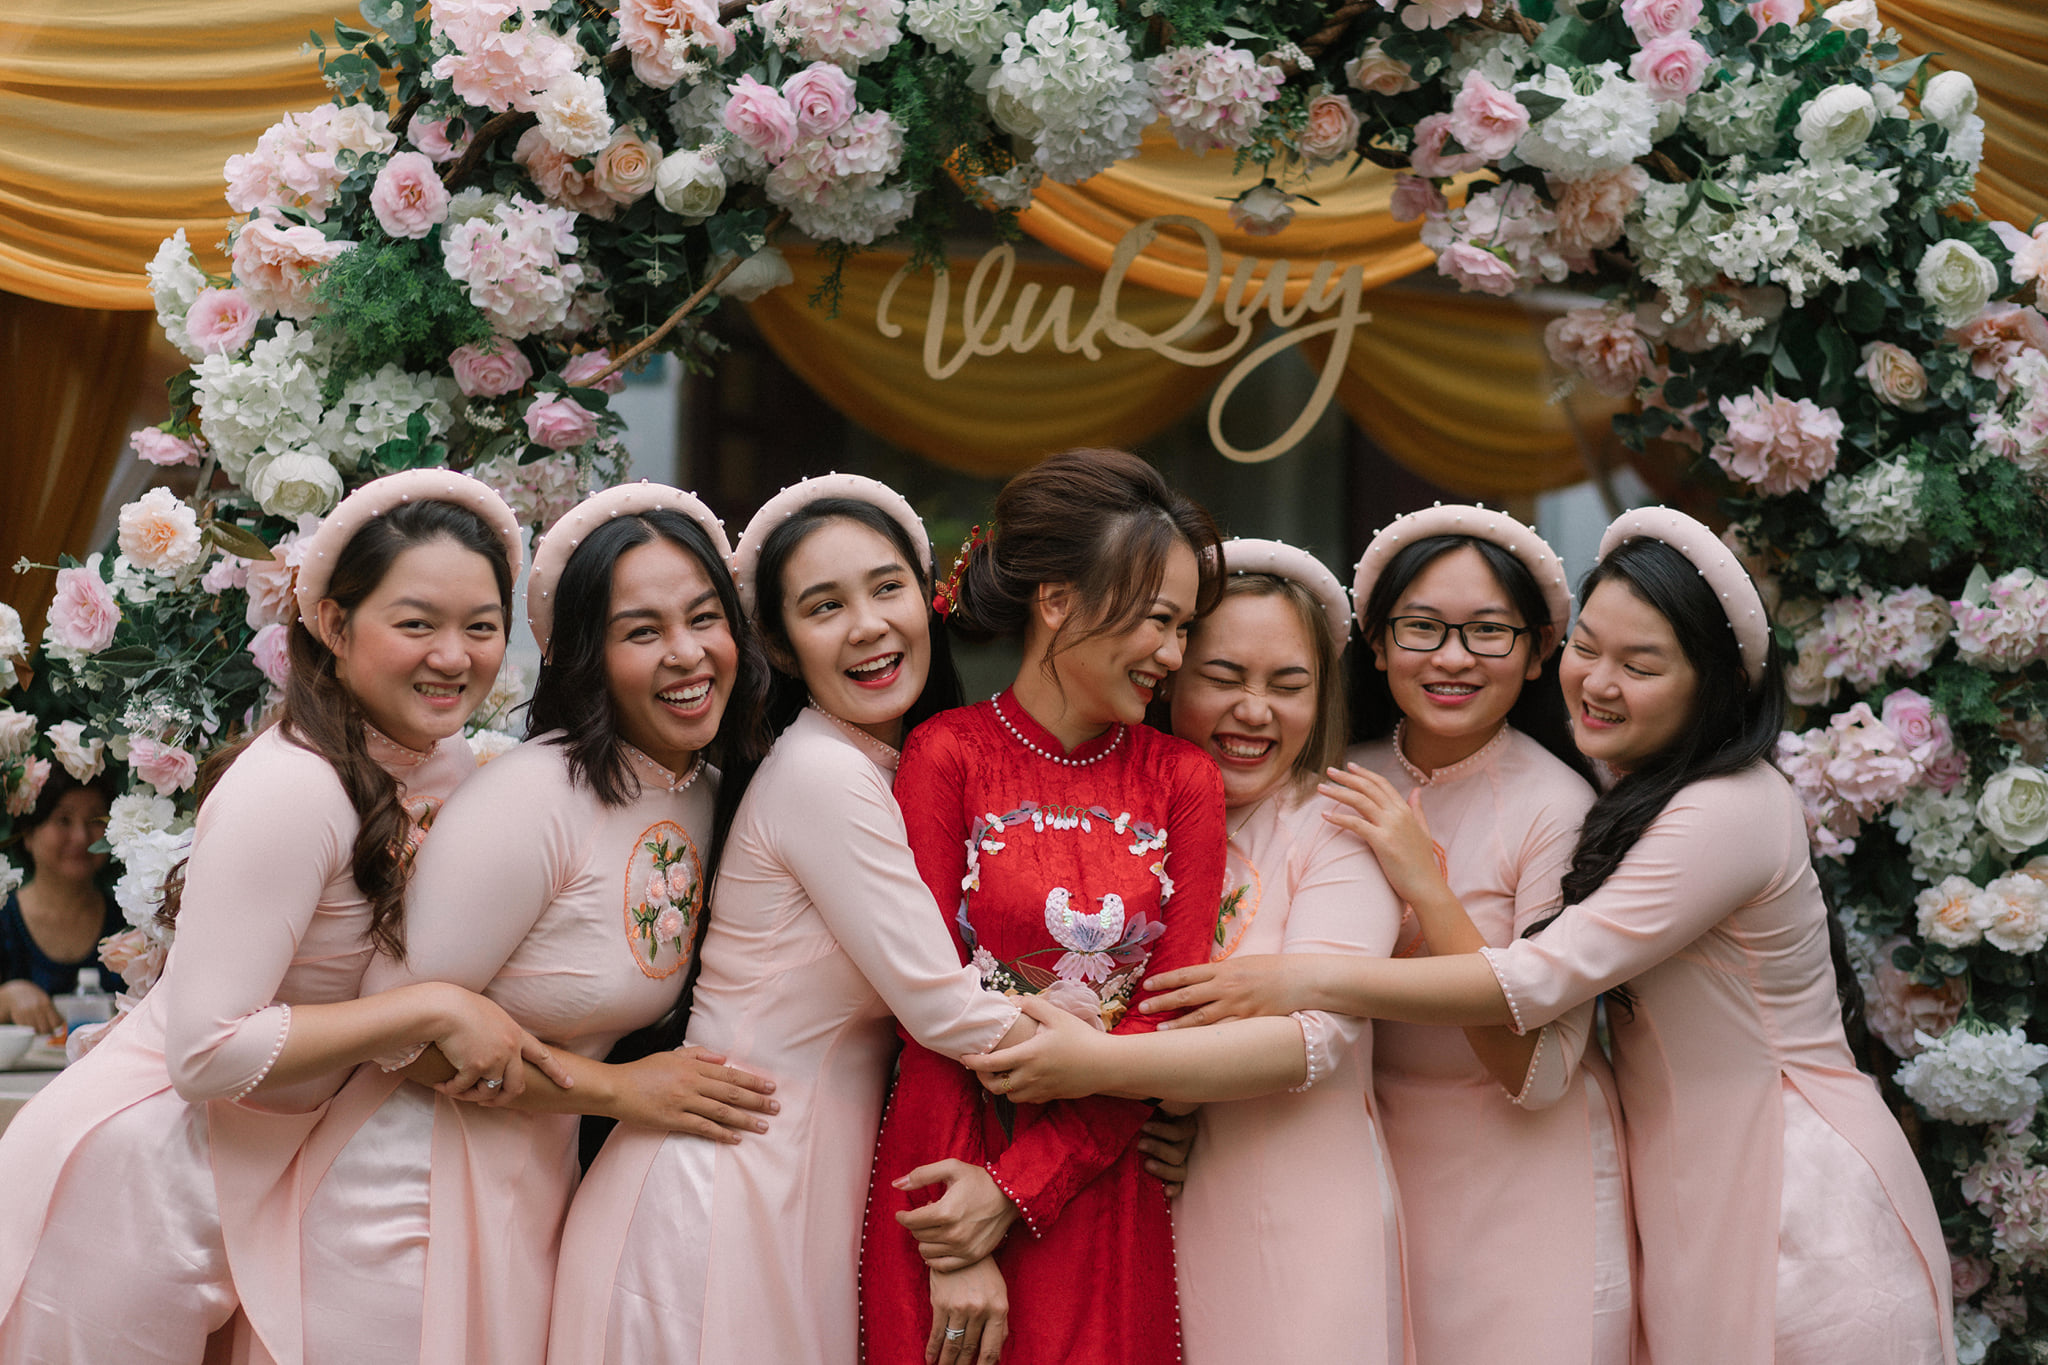 Vy + Quynh | Wedding in Sai Gon